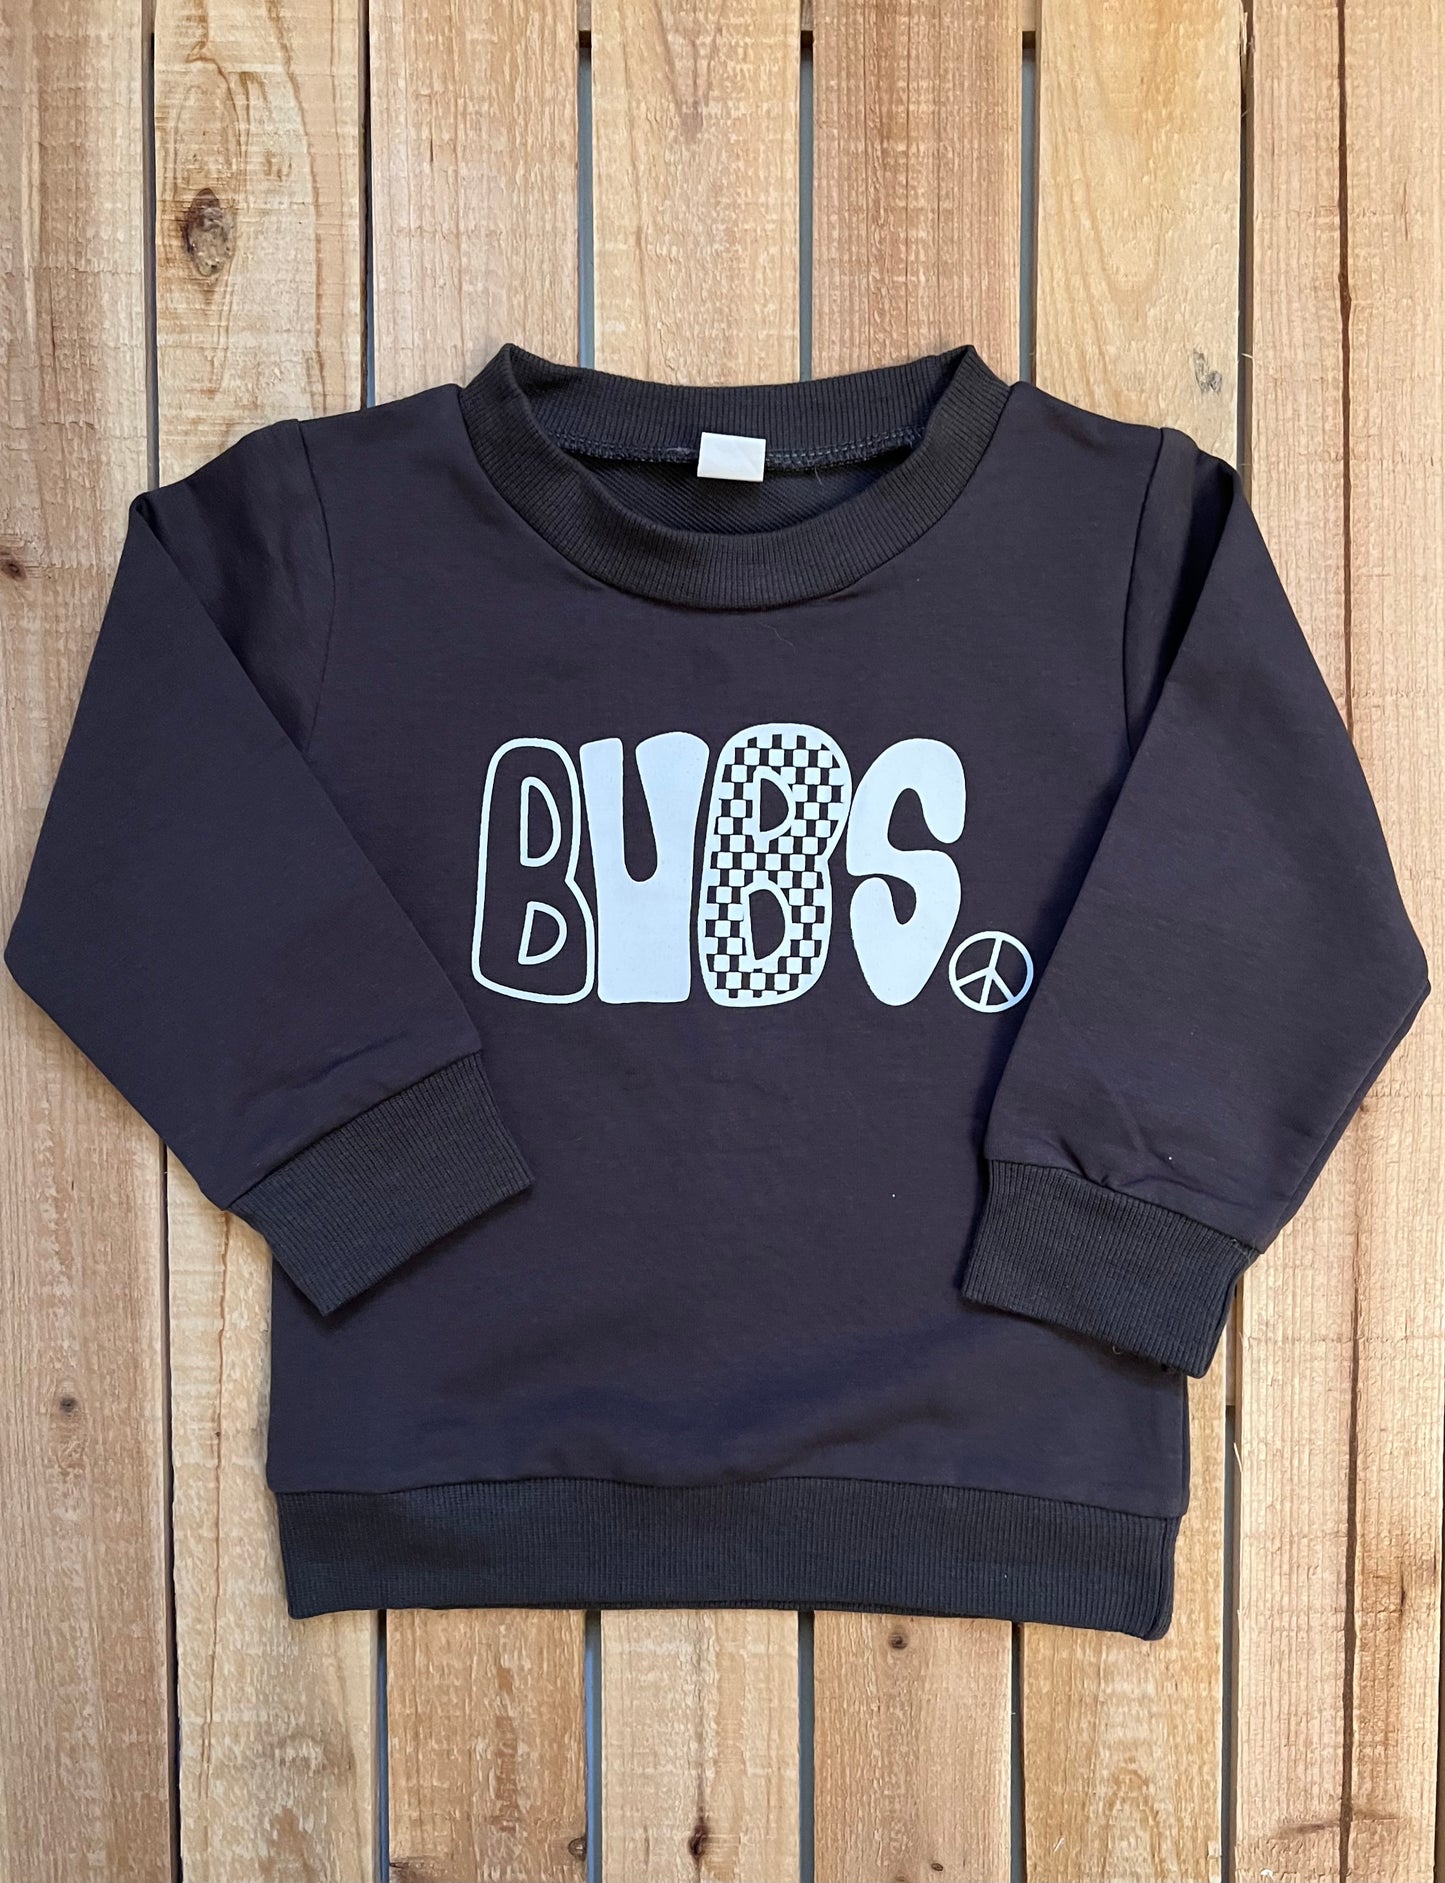 Bubs and Babe Pullover